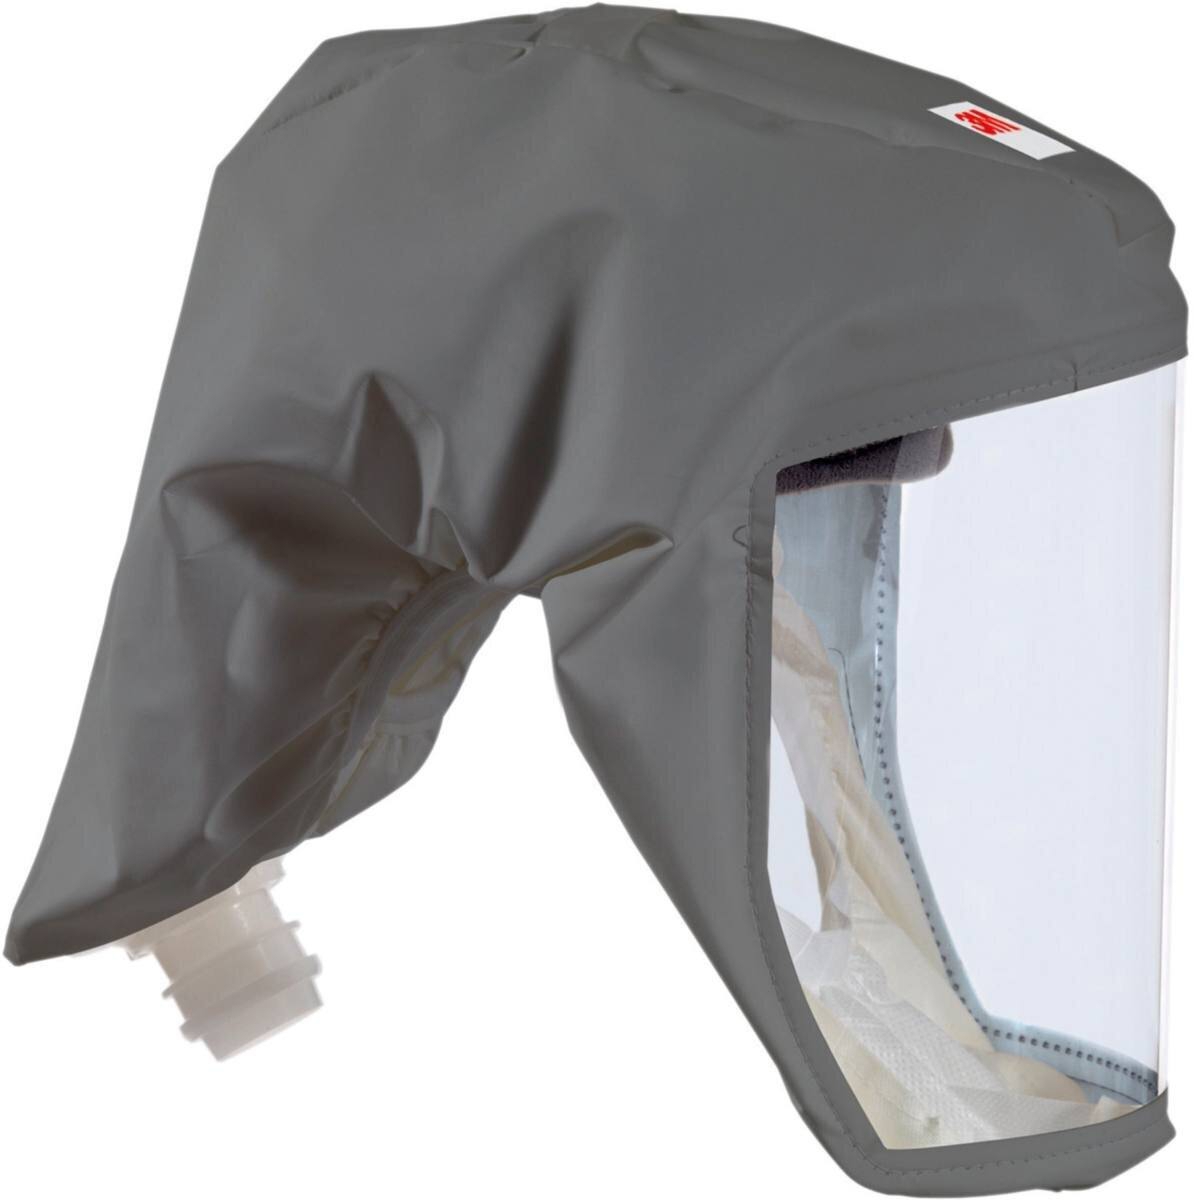 3M Speedglas Versaflo disposable lightweight hood S333L, with integrated head holder, size M/L with Adflo blower respirator with QRS air hose, adapter, air flow meter, pre-filter, spark arrester, particle filter, lithium-ion battery and charger